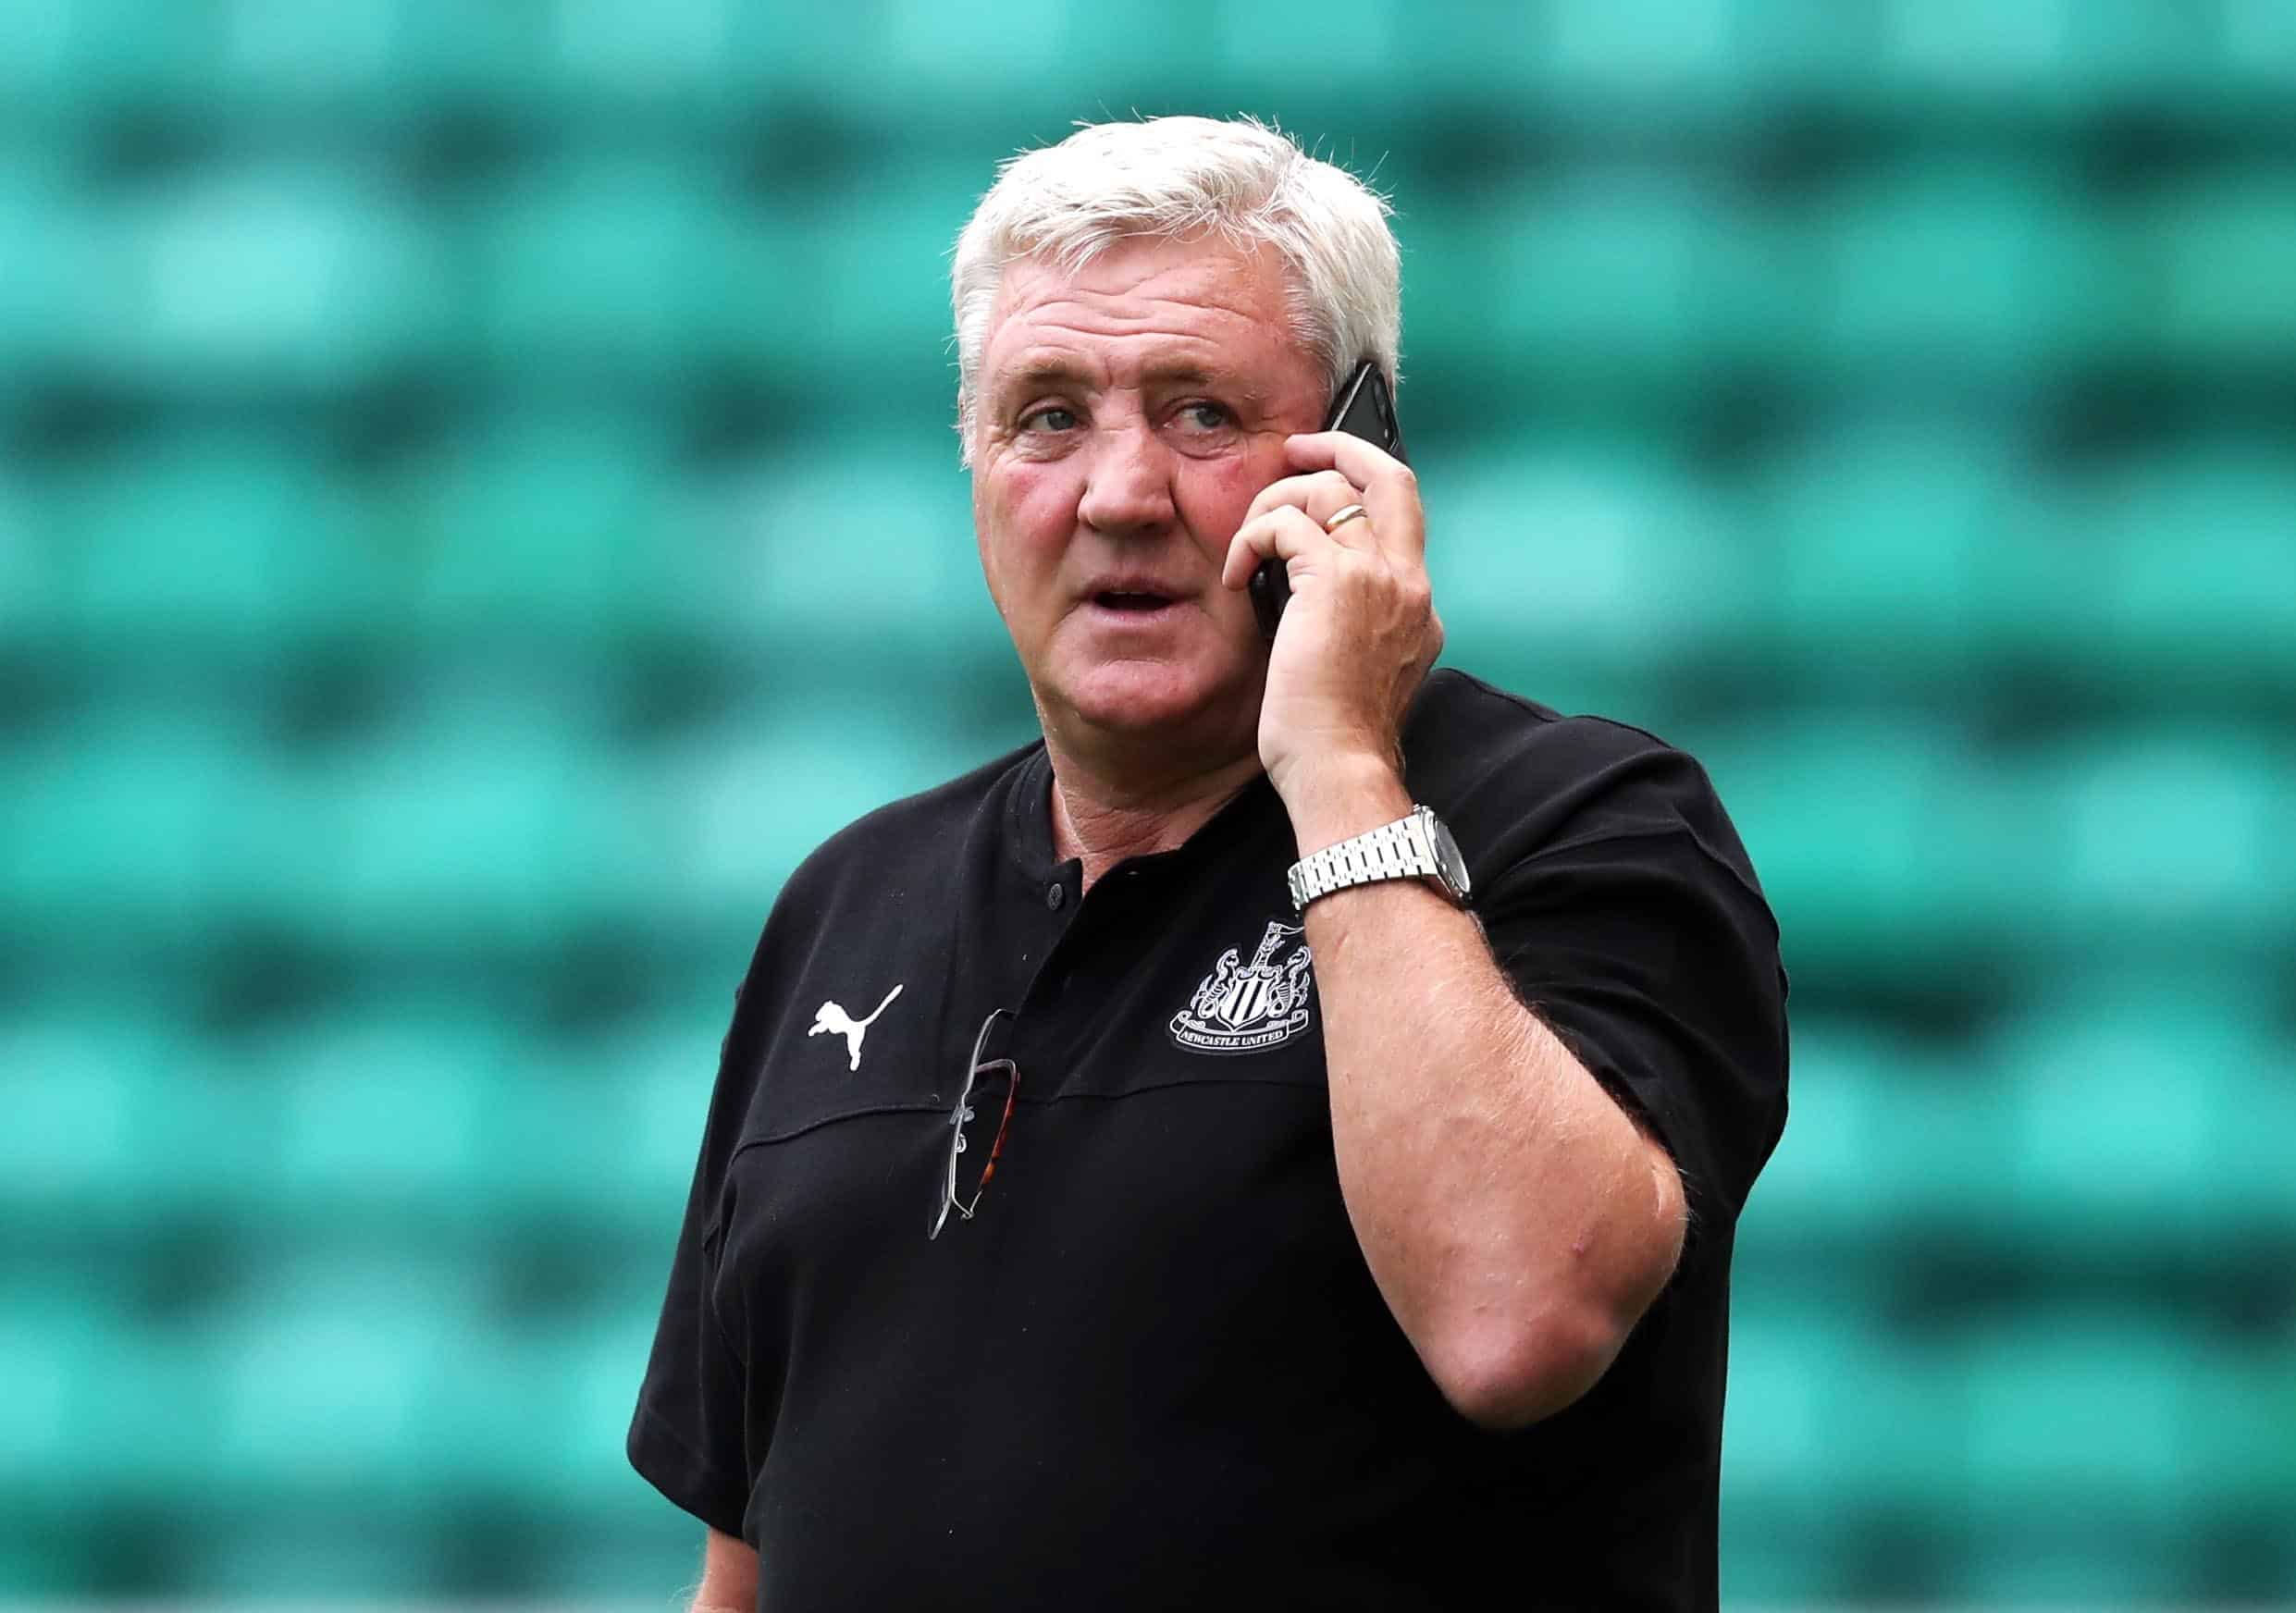 ‘There’s always a storm in Newcastle and at the minute, we’re in one’ – says Newcastle United boss somewhat confusingly